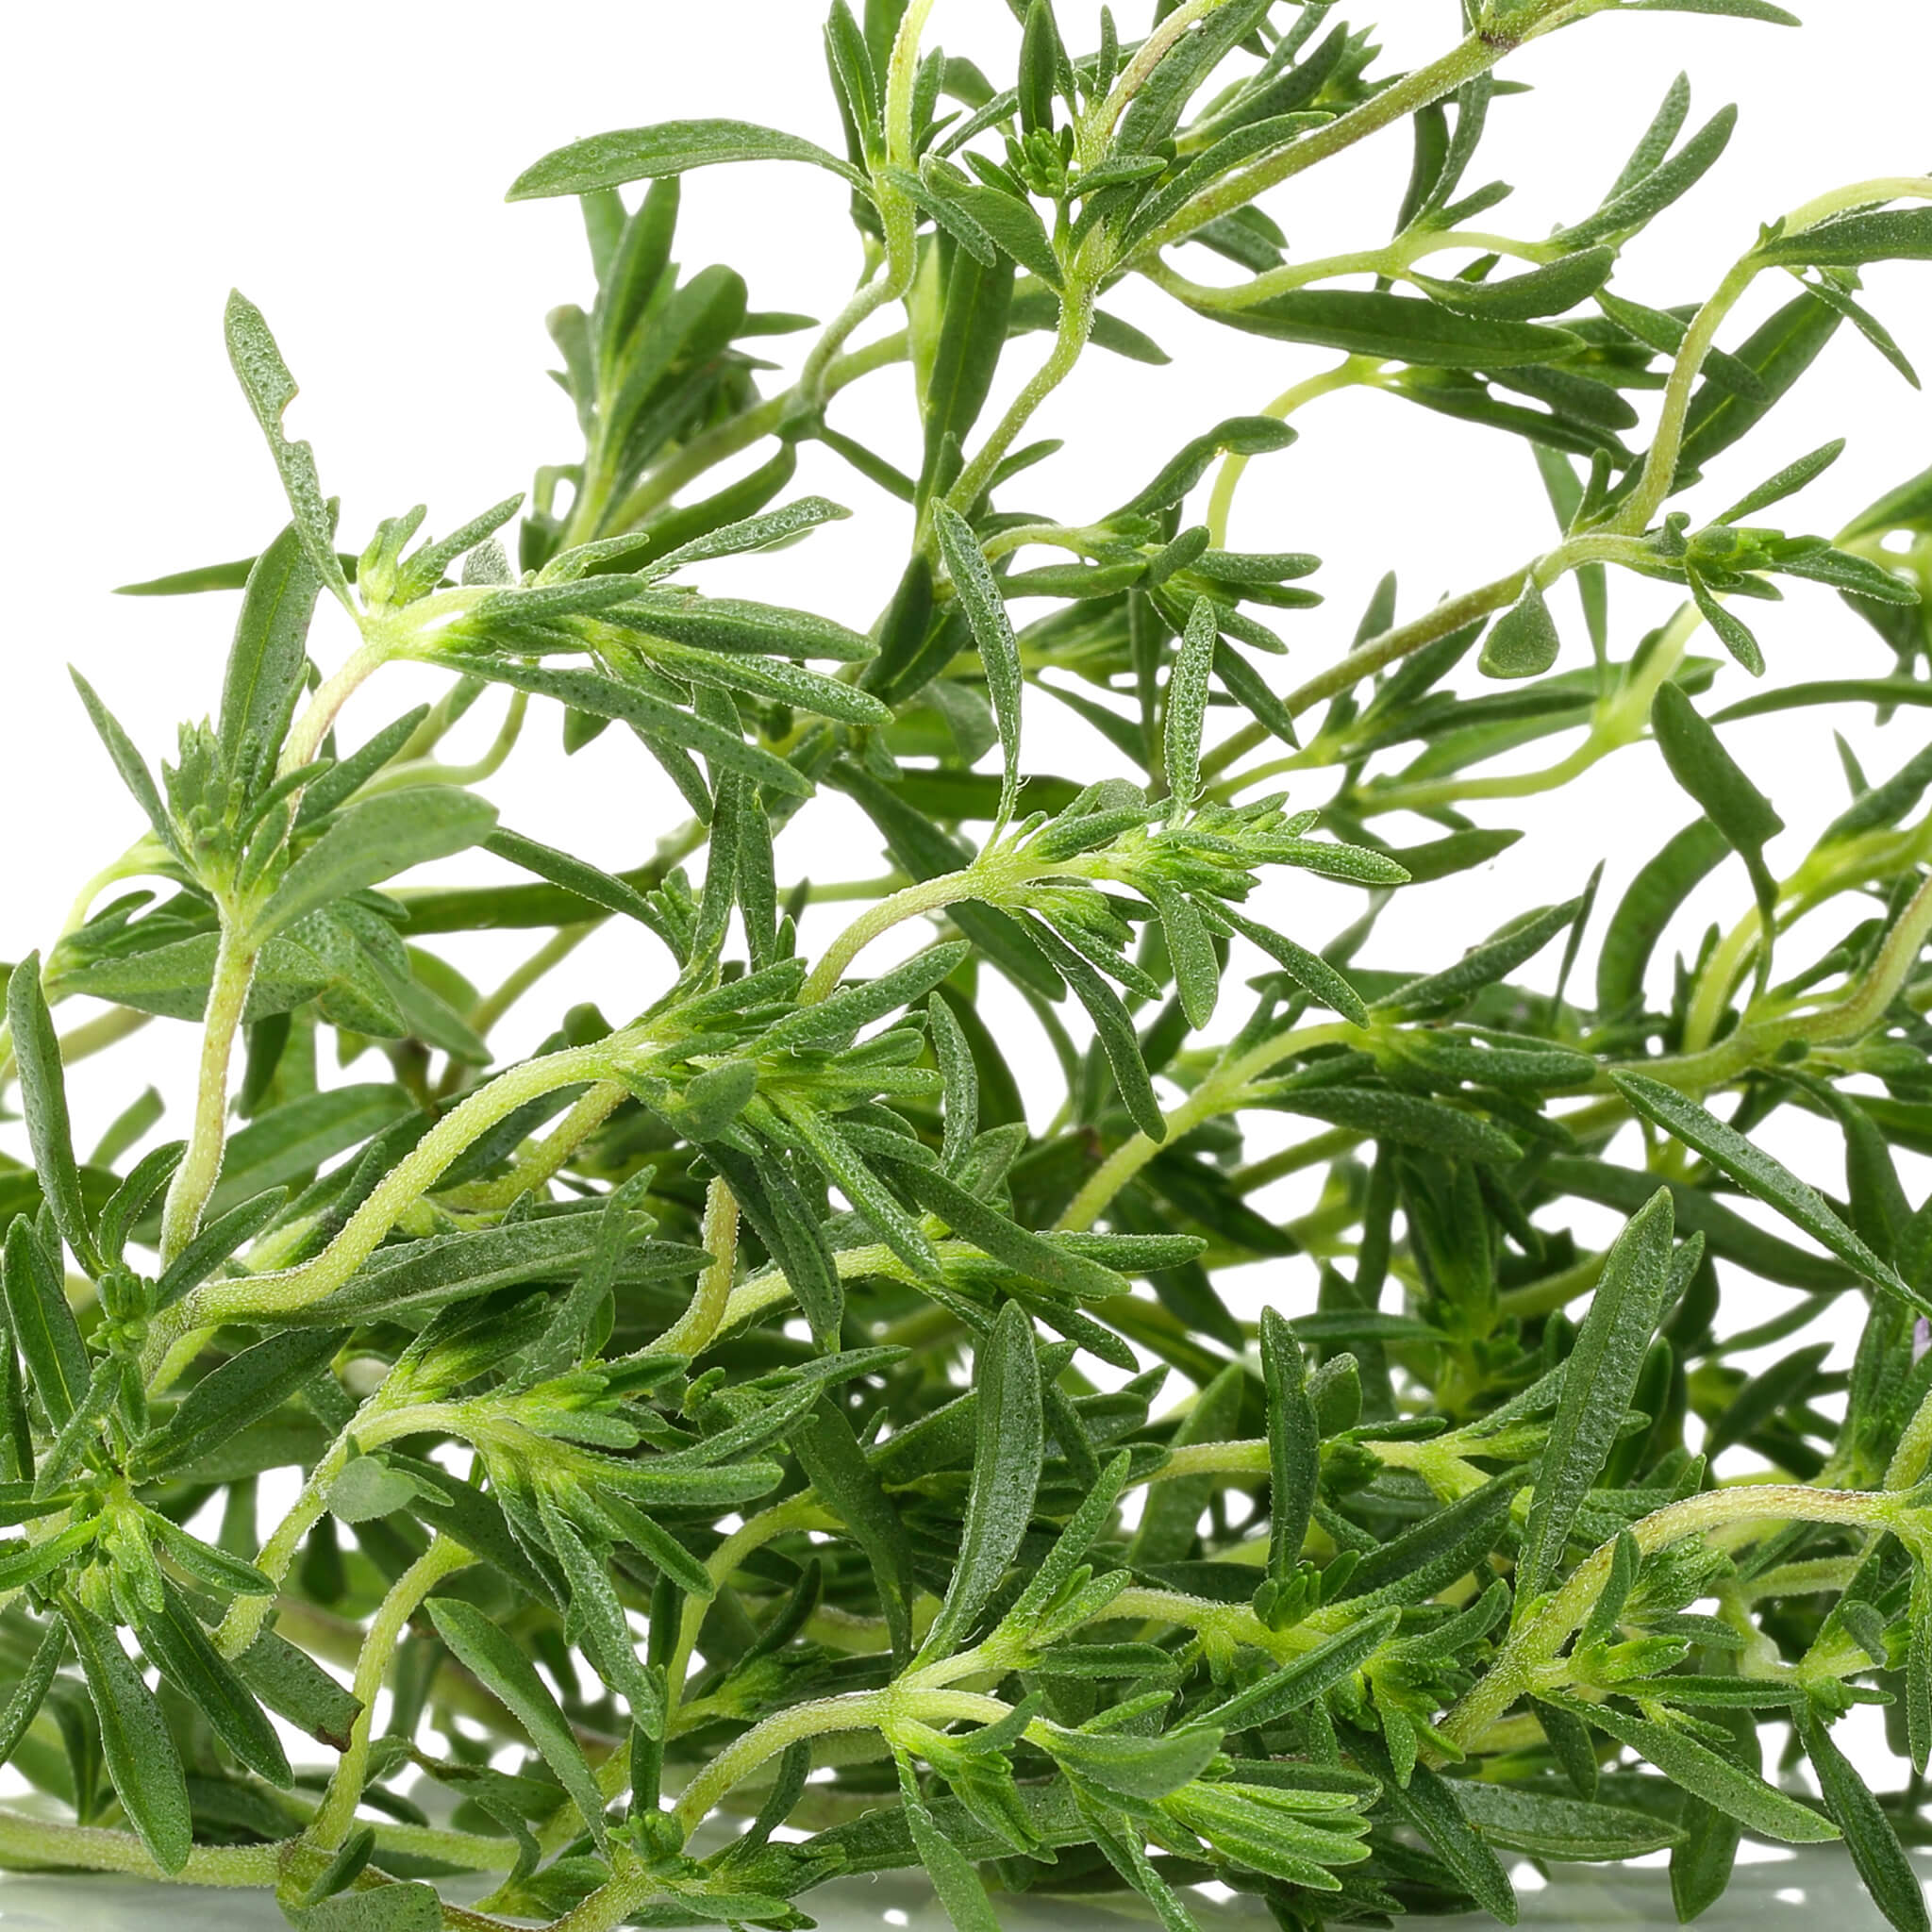 Product Page Key Ingredients: Rosemary